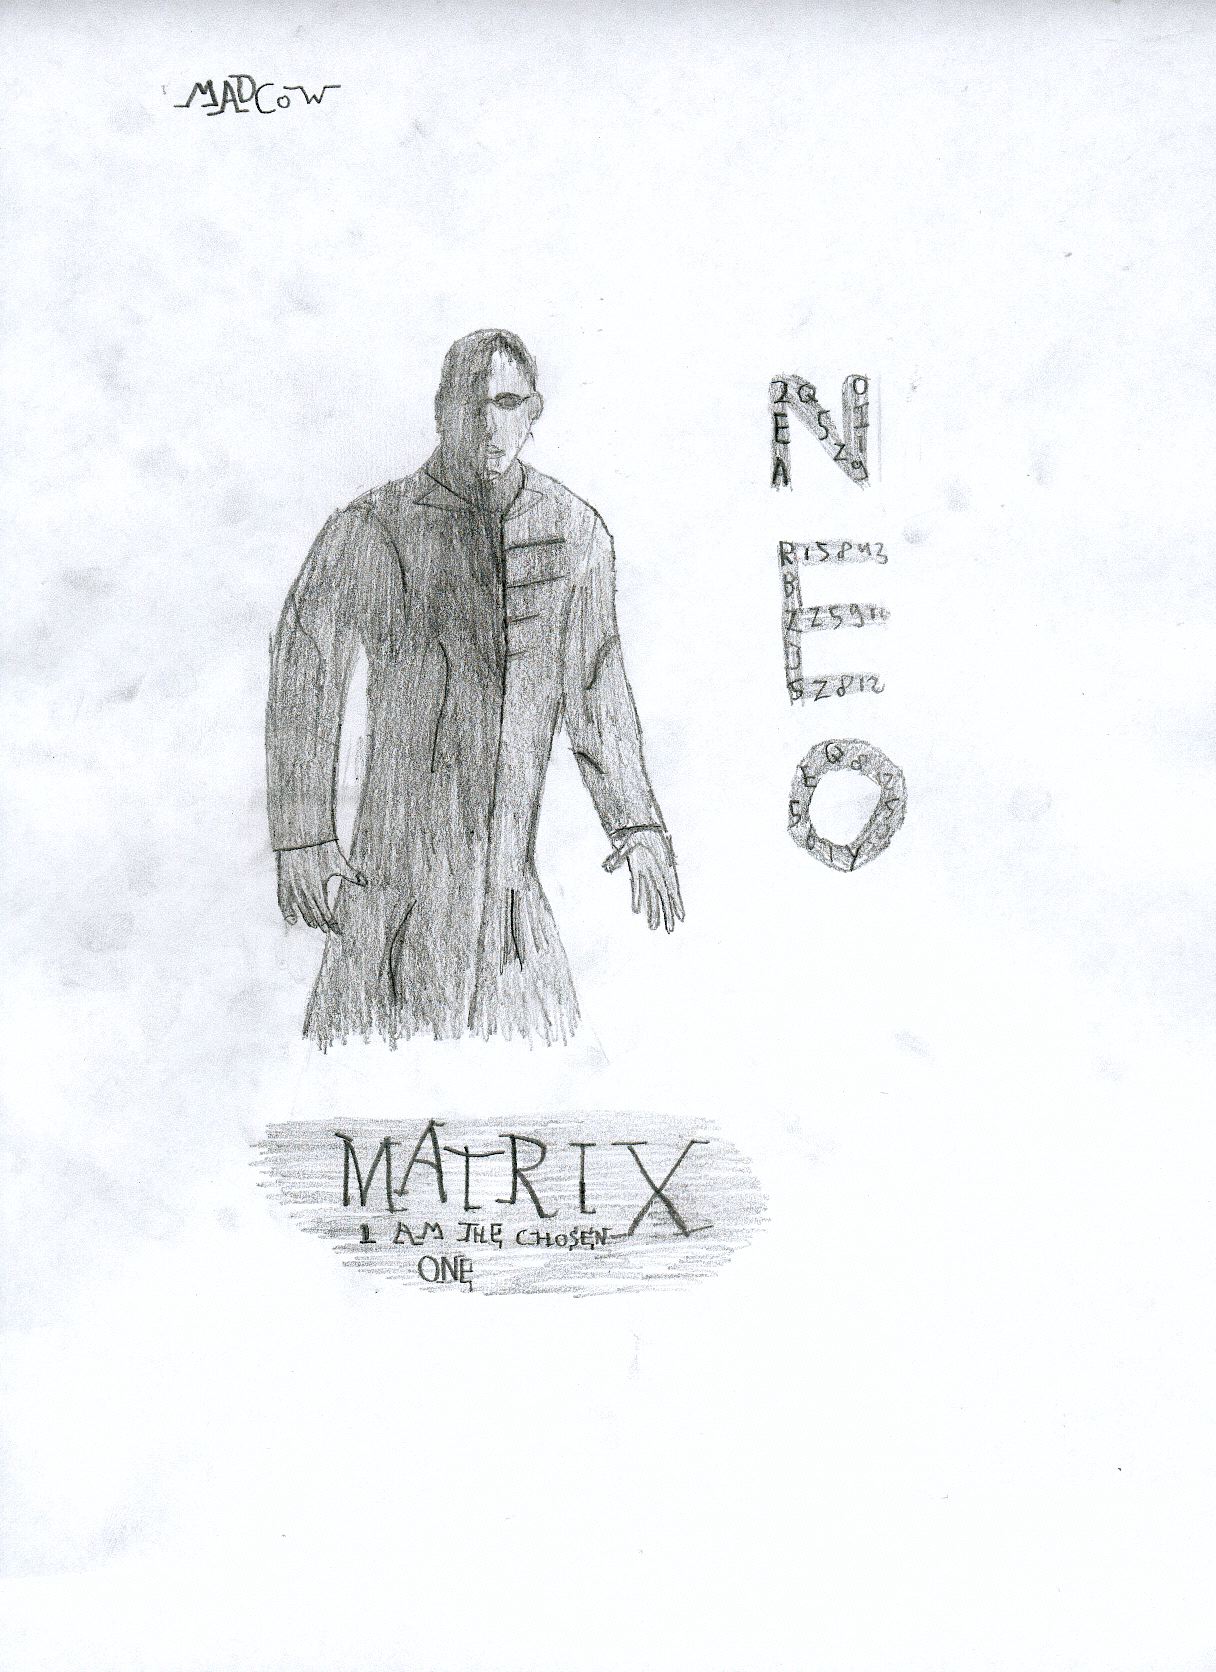 Neo The One by MadCow1989